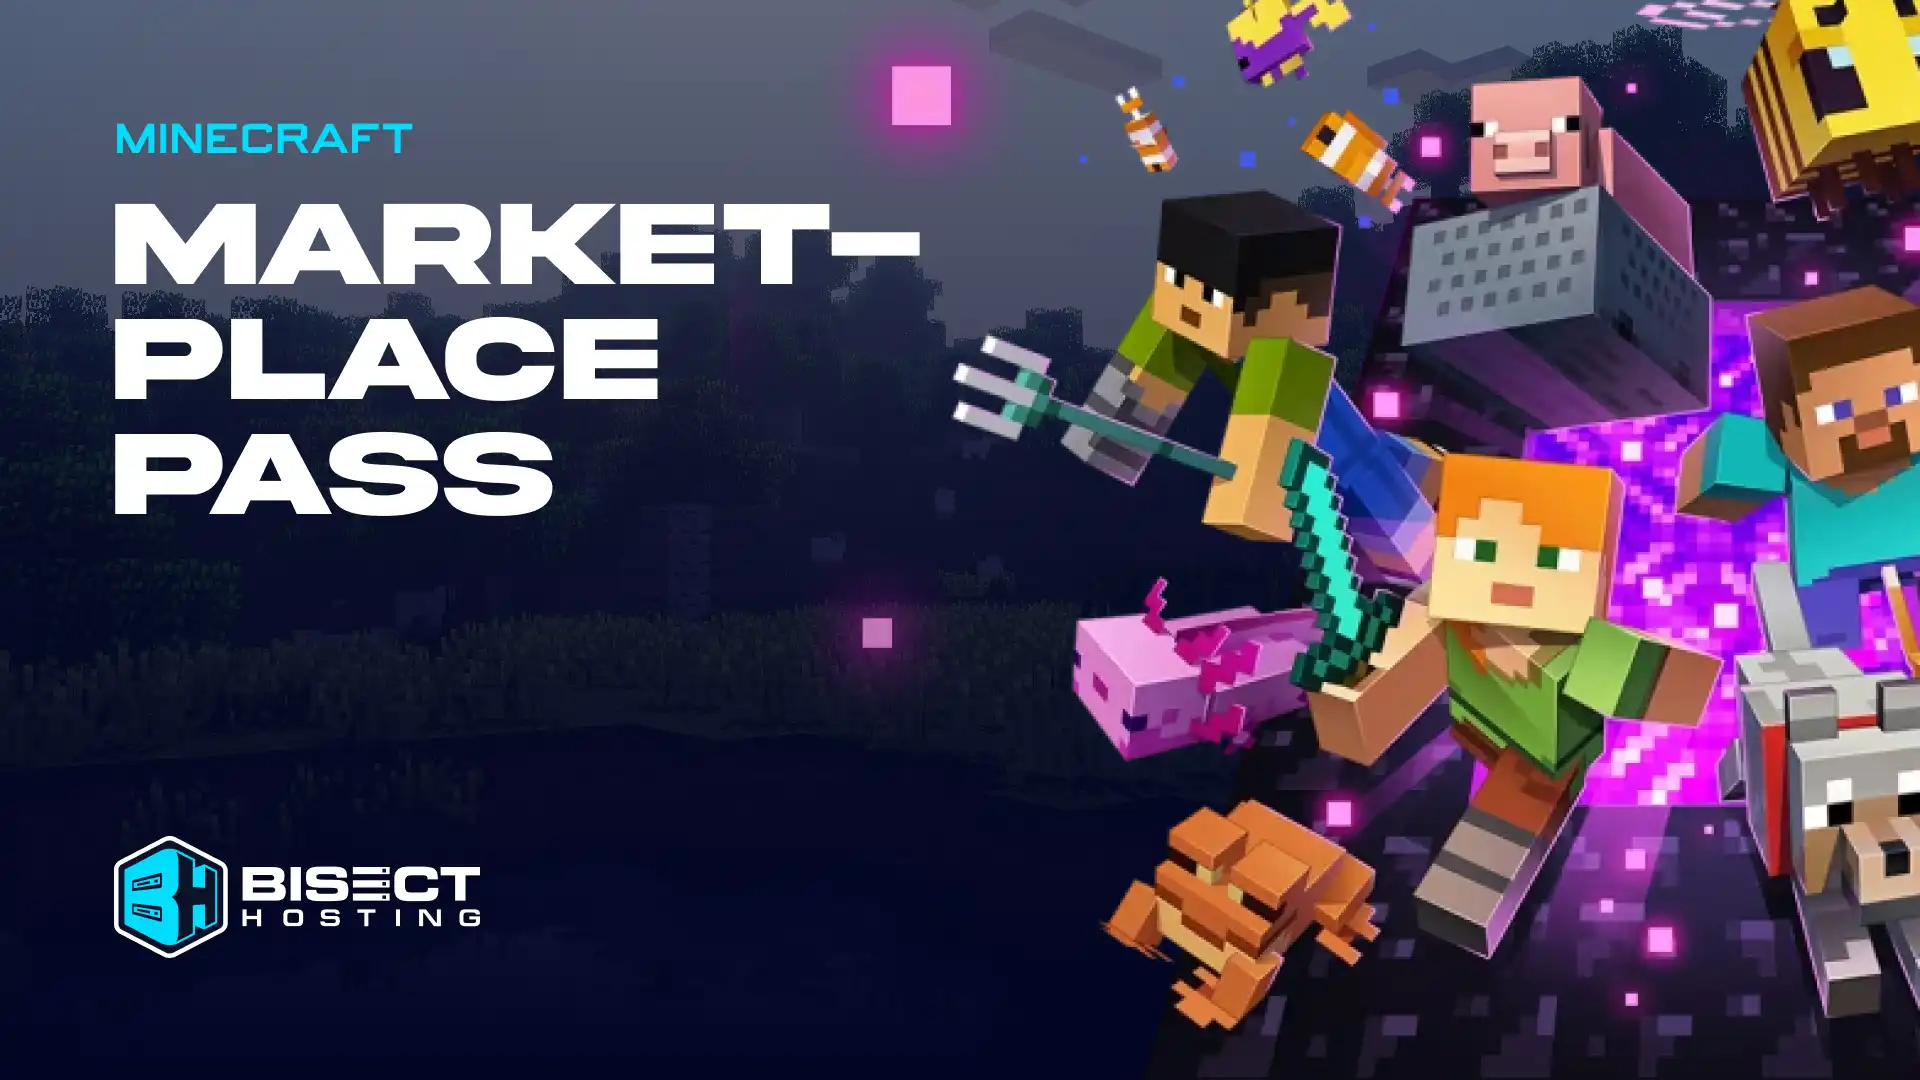 What is the Minecraft Marketplace Pass?